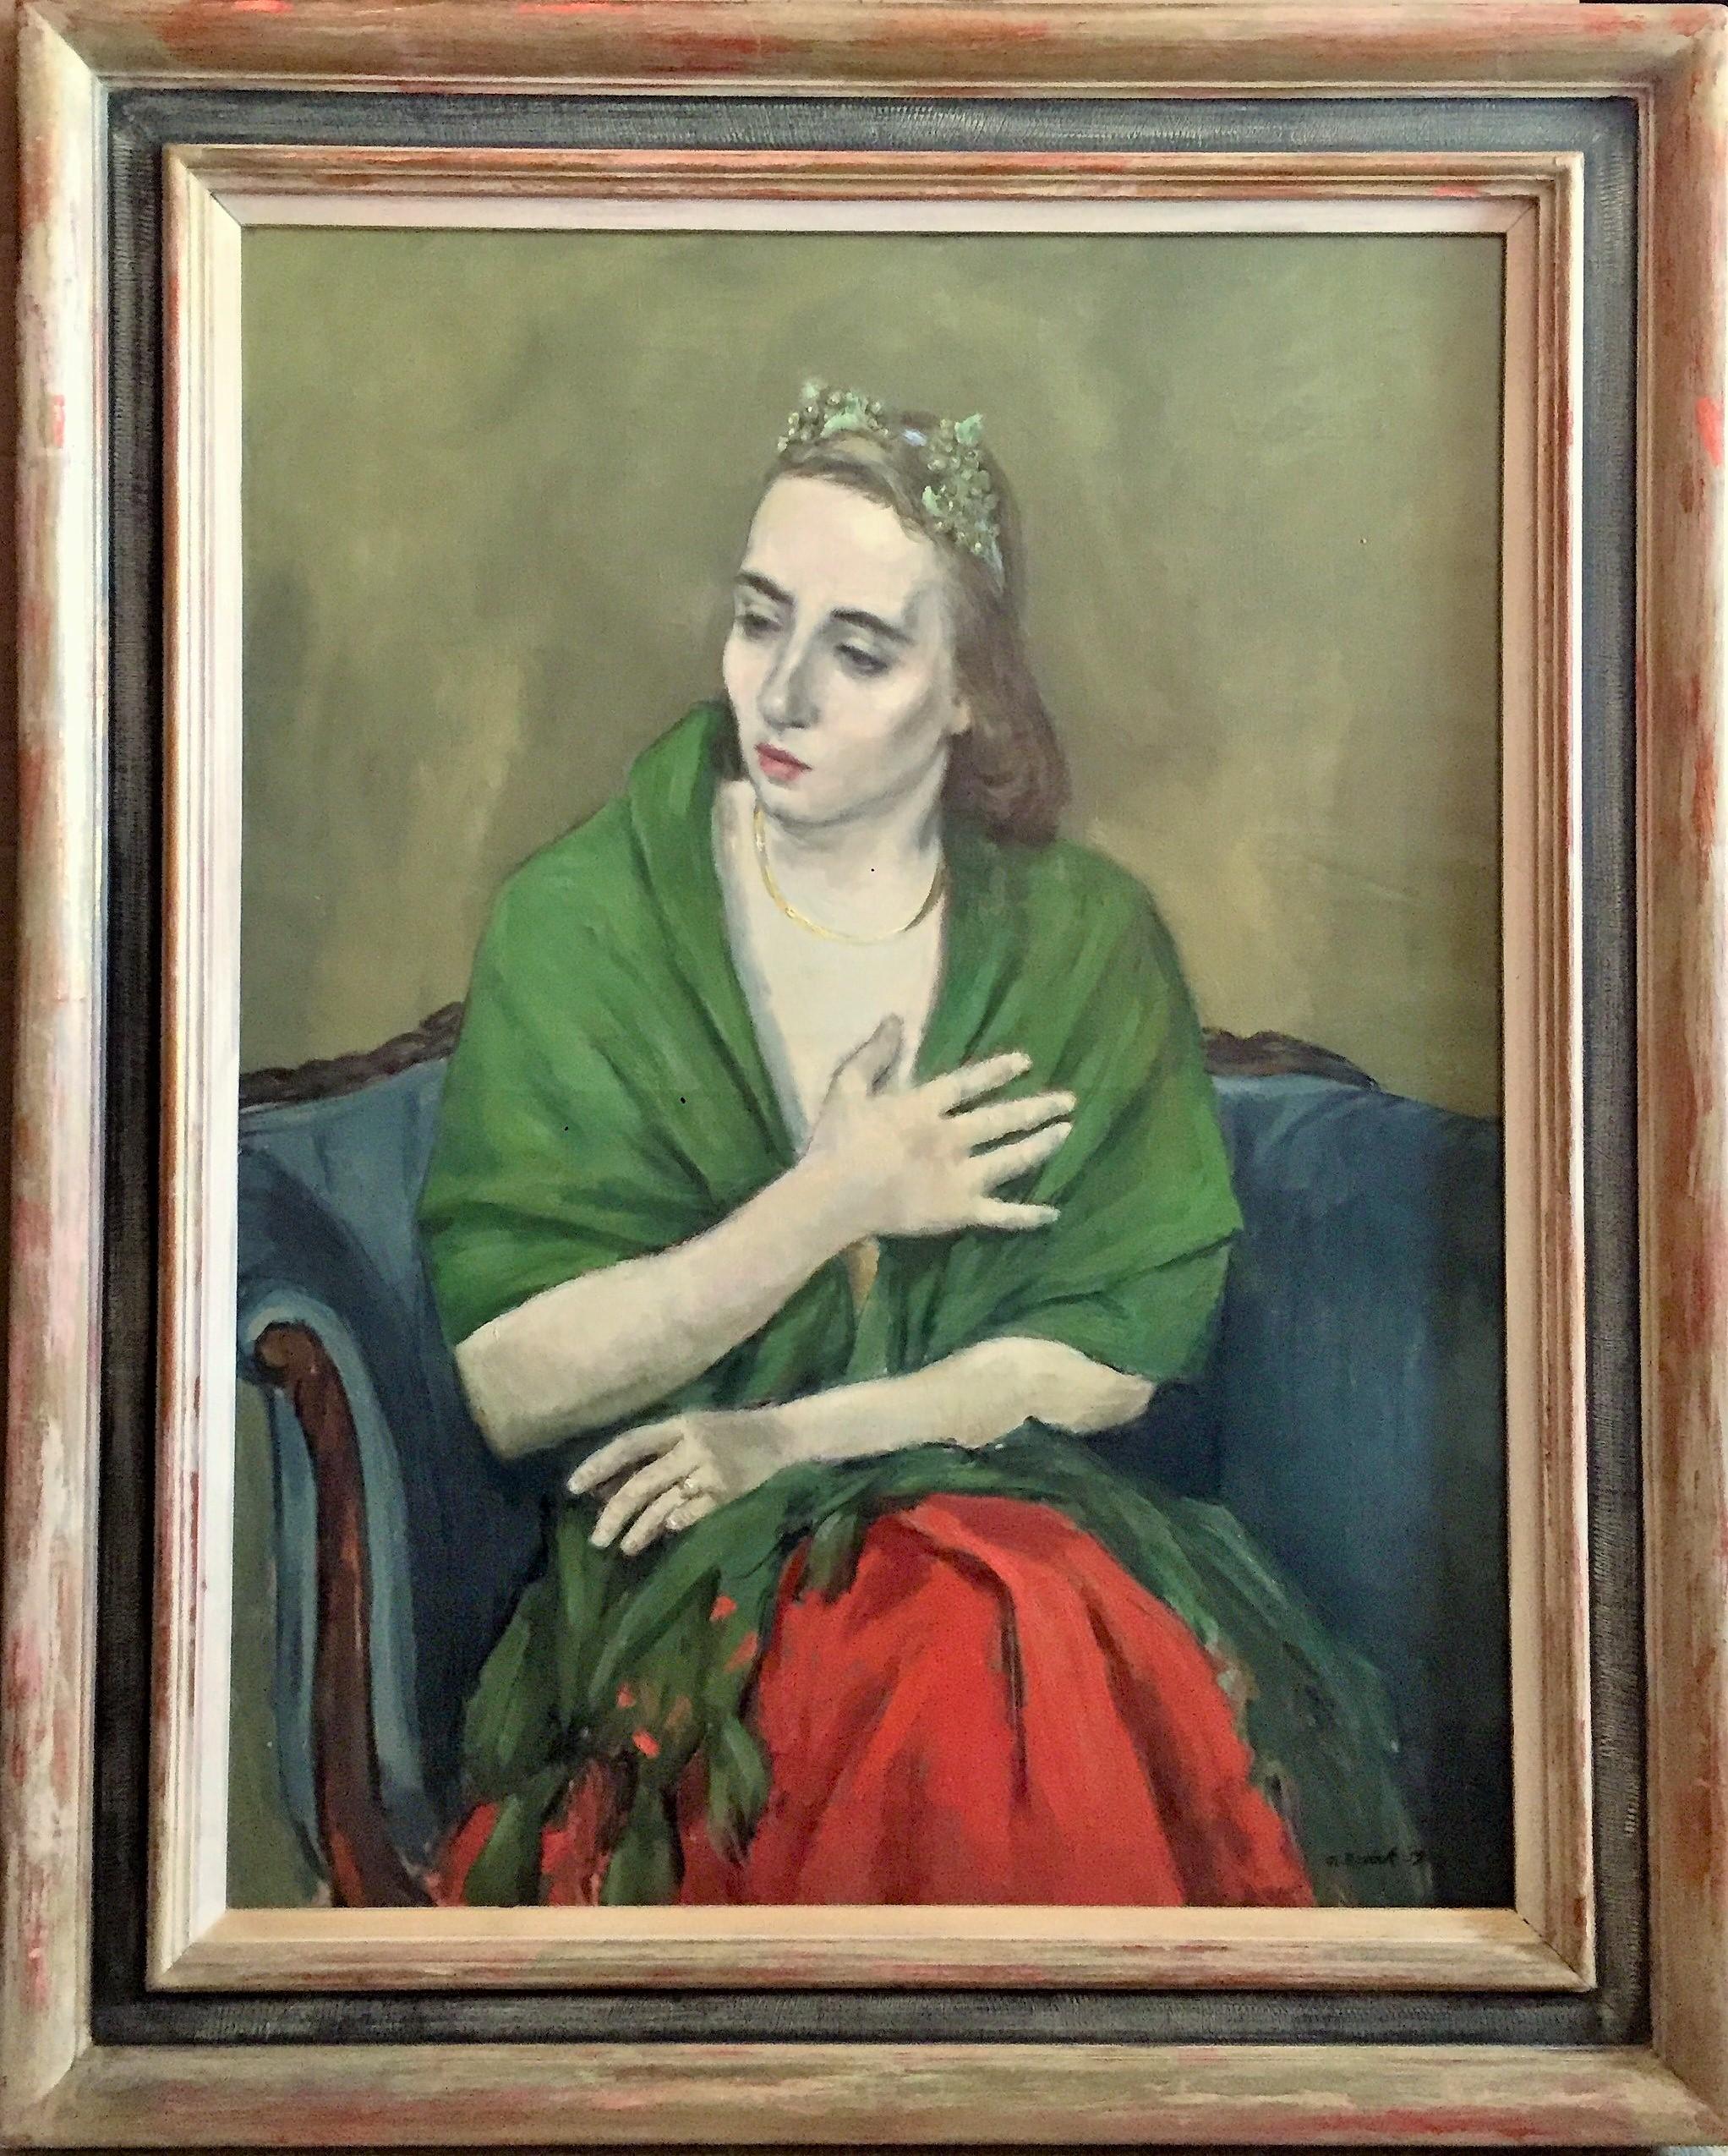 A Painting of Adaline Glasheen as a Writer's Muse